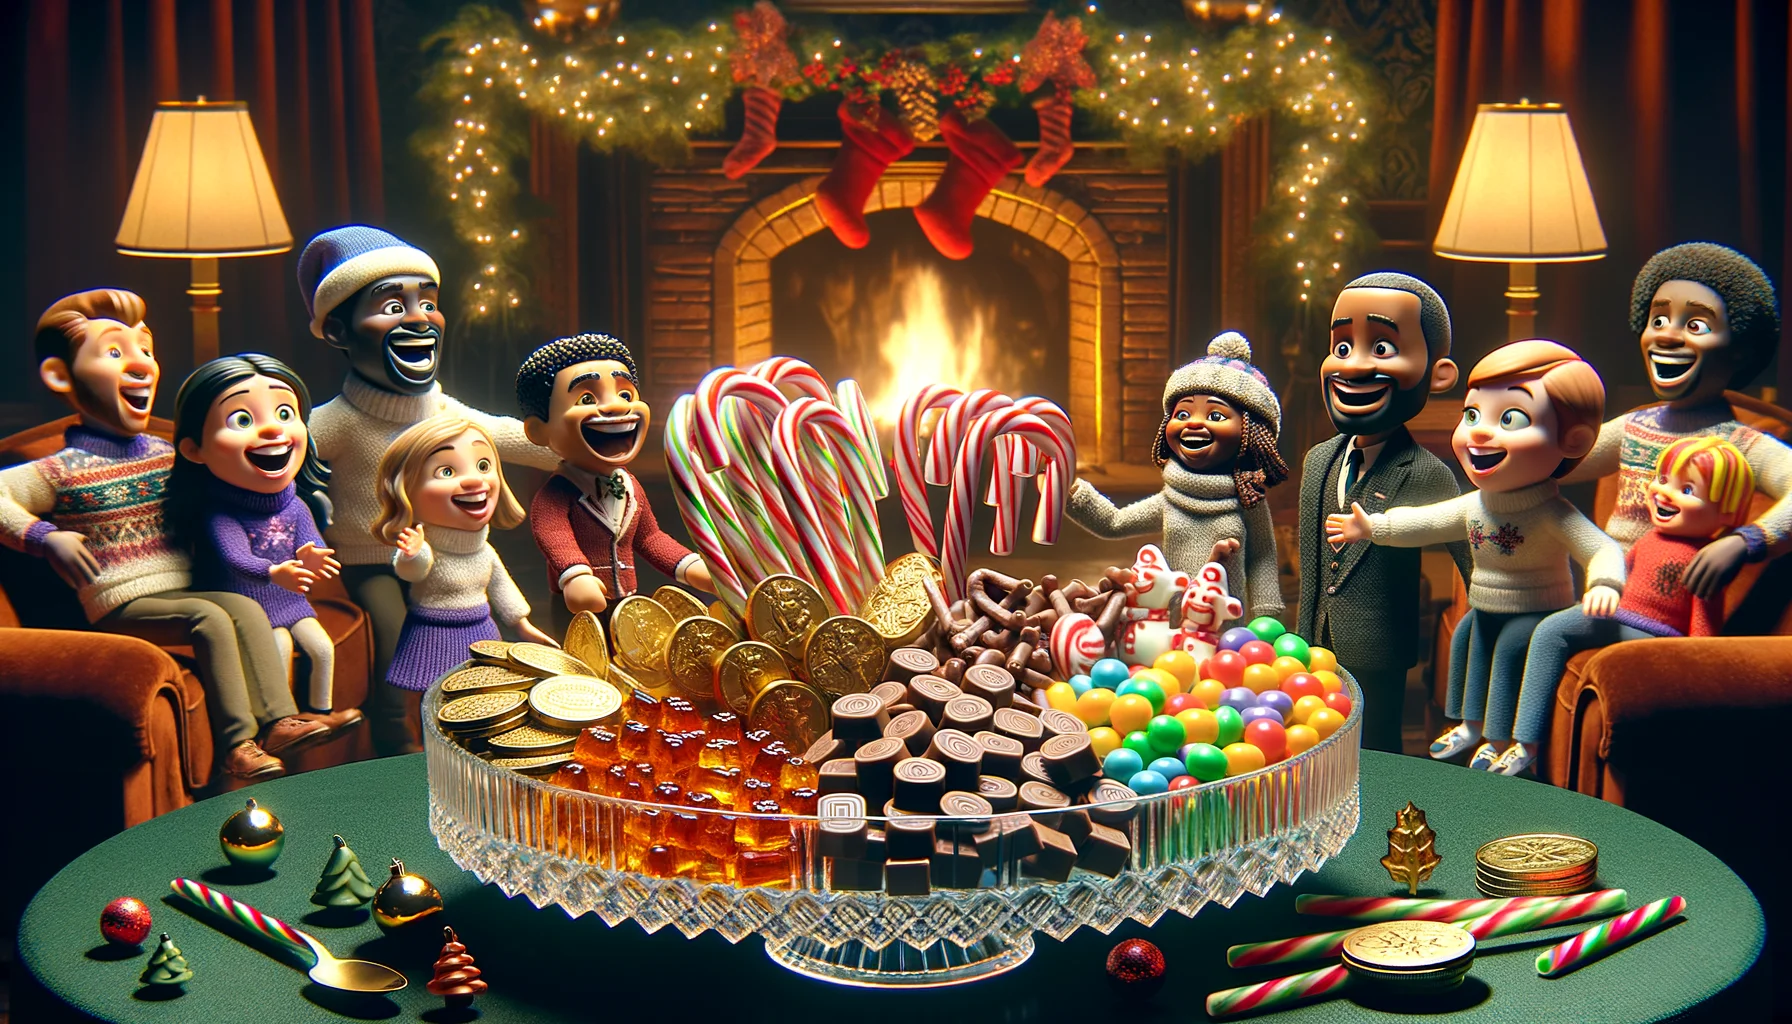 Create a hilariously realistic image that portrays a variety of candies organized meticulously for a New Year's celebration. Candy canes, chocolate coins, taffy, gummy bears, and licorice are all represented, each with its own designated spot on a fancy crystal platter. The setting is a cozy living room draped in festive decorations, a warm fireplace blazing in the back, illuminating the scene with a soft, inviting glow. A smallish group of animated friends, a Caucasian woman, a Middle-Eastern man, and a Black child are laughing heartily as they reach for their favorite candies, obviously enjoying the celebration and the treats.